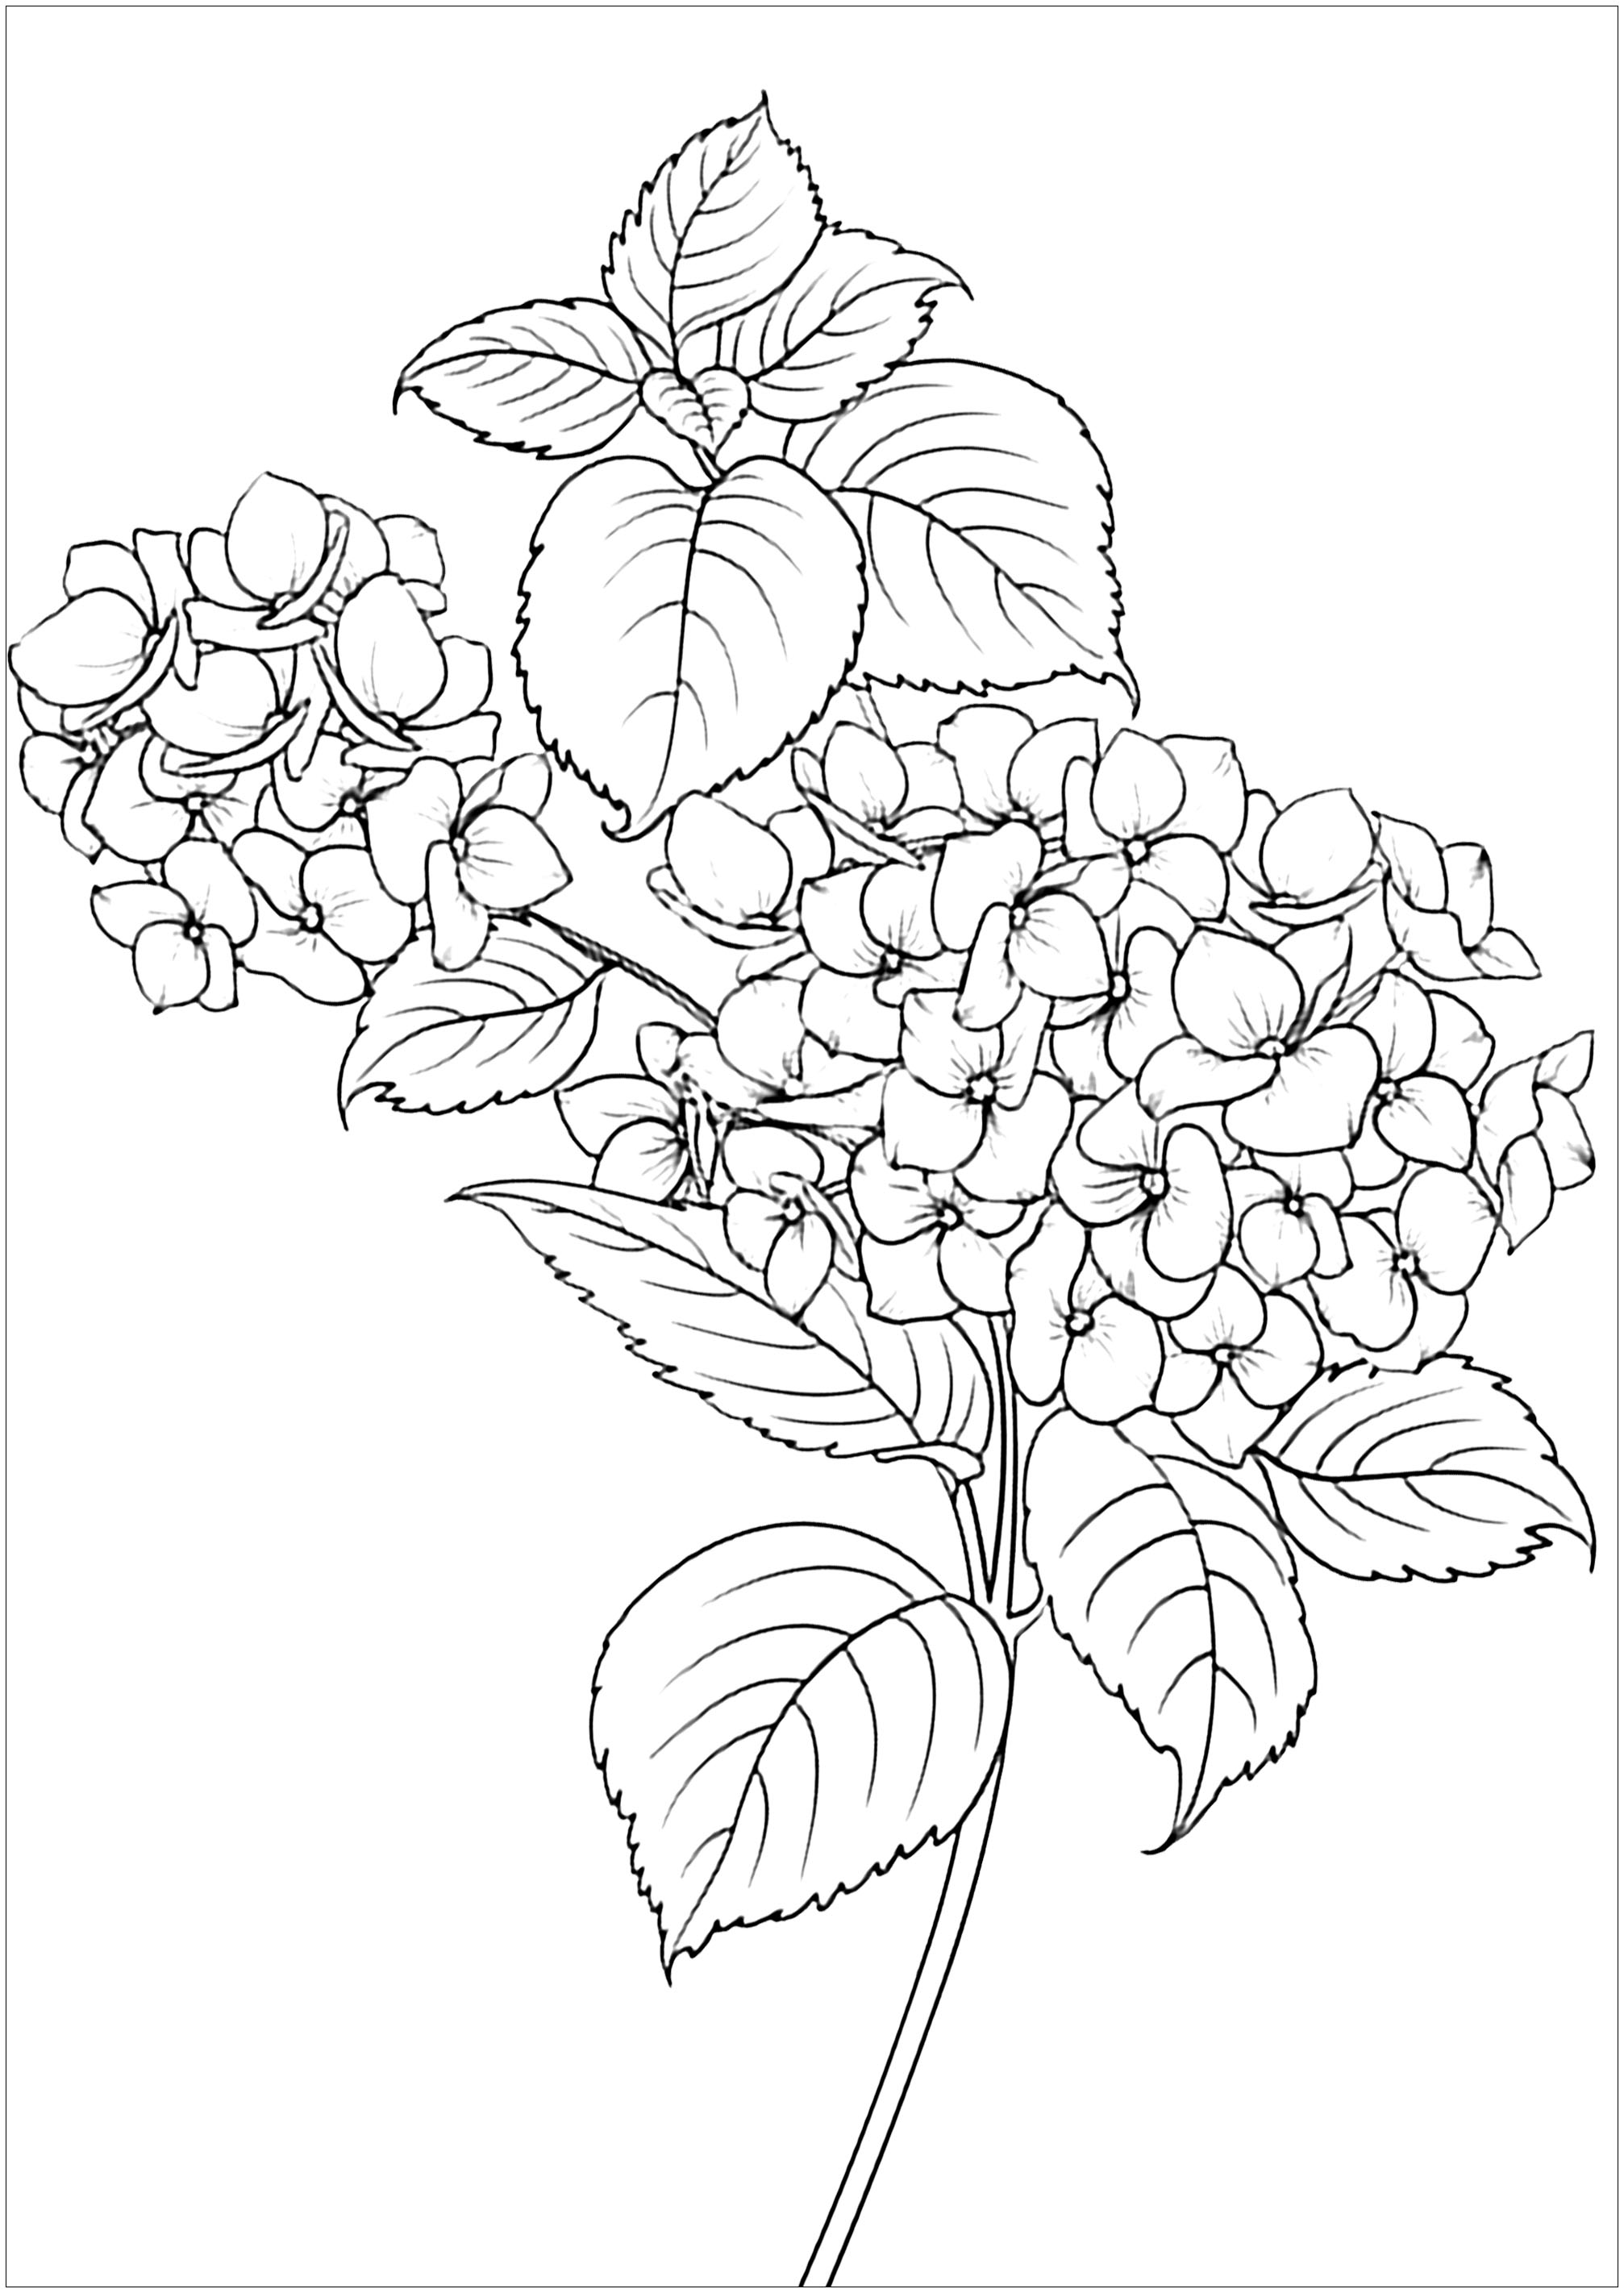 Simple coloring page with elegant flowers and leaves